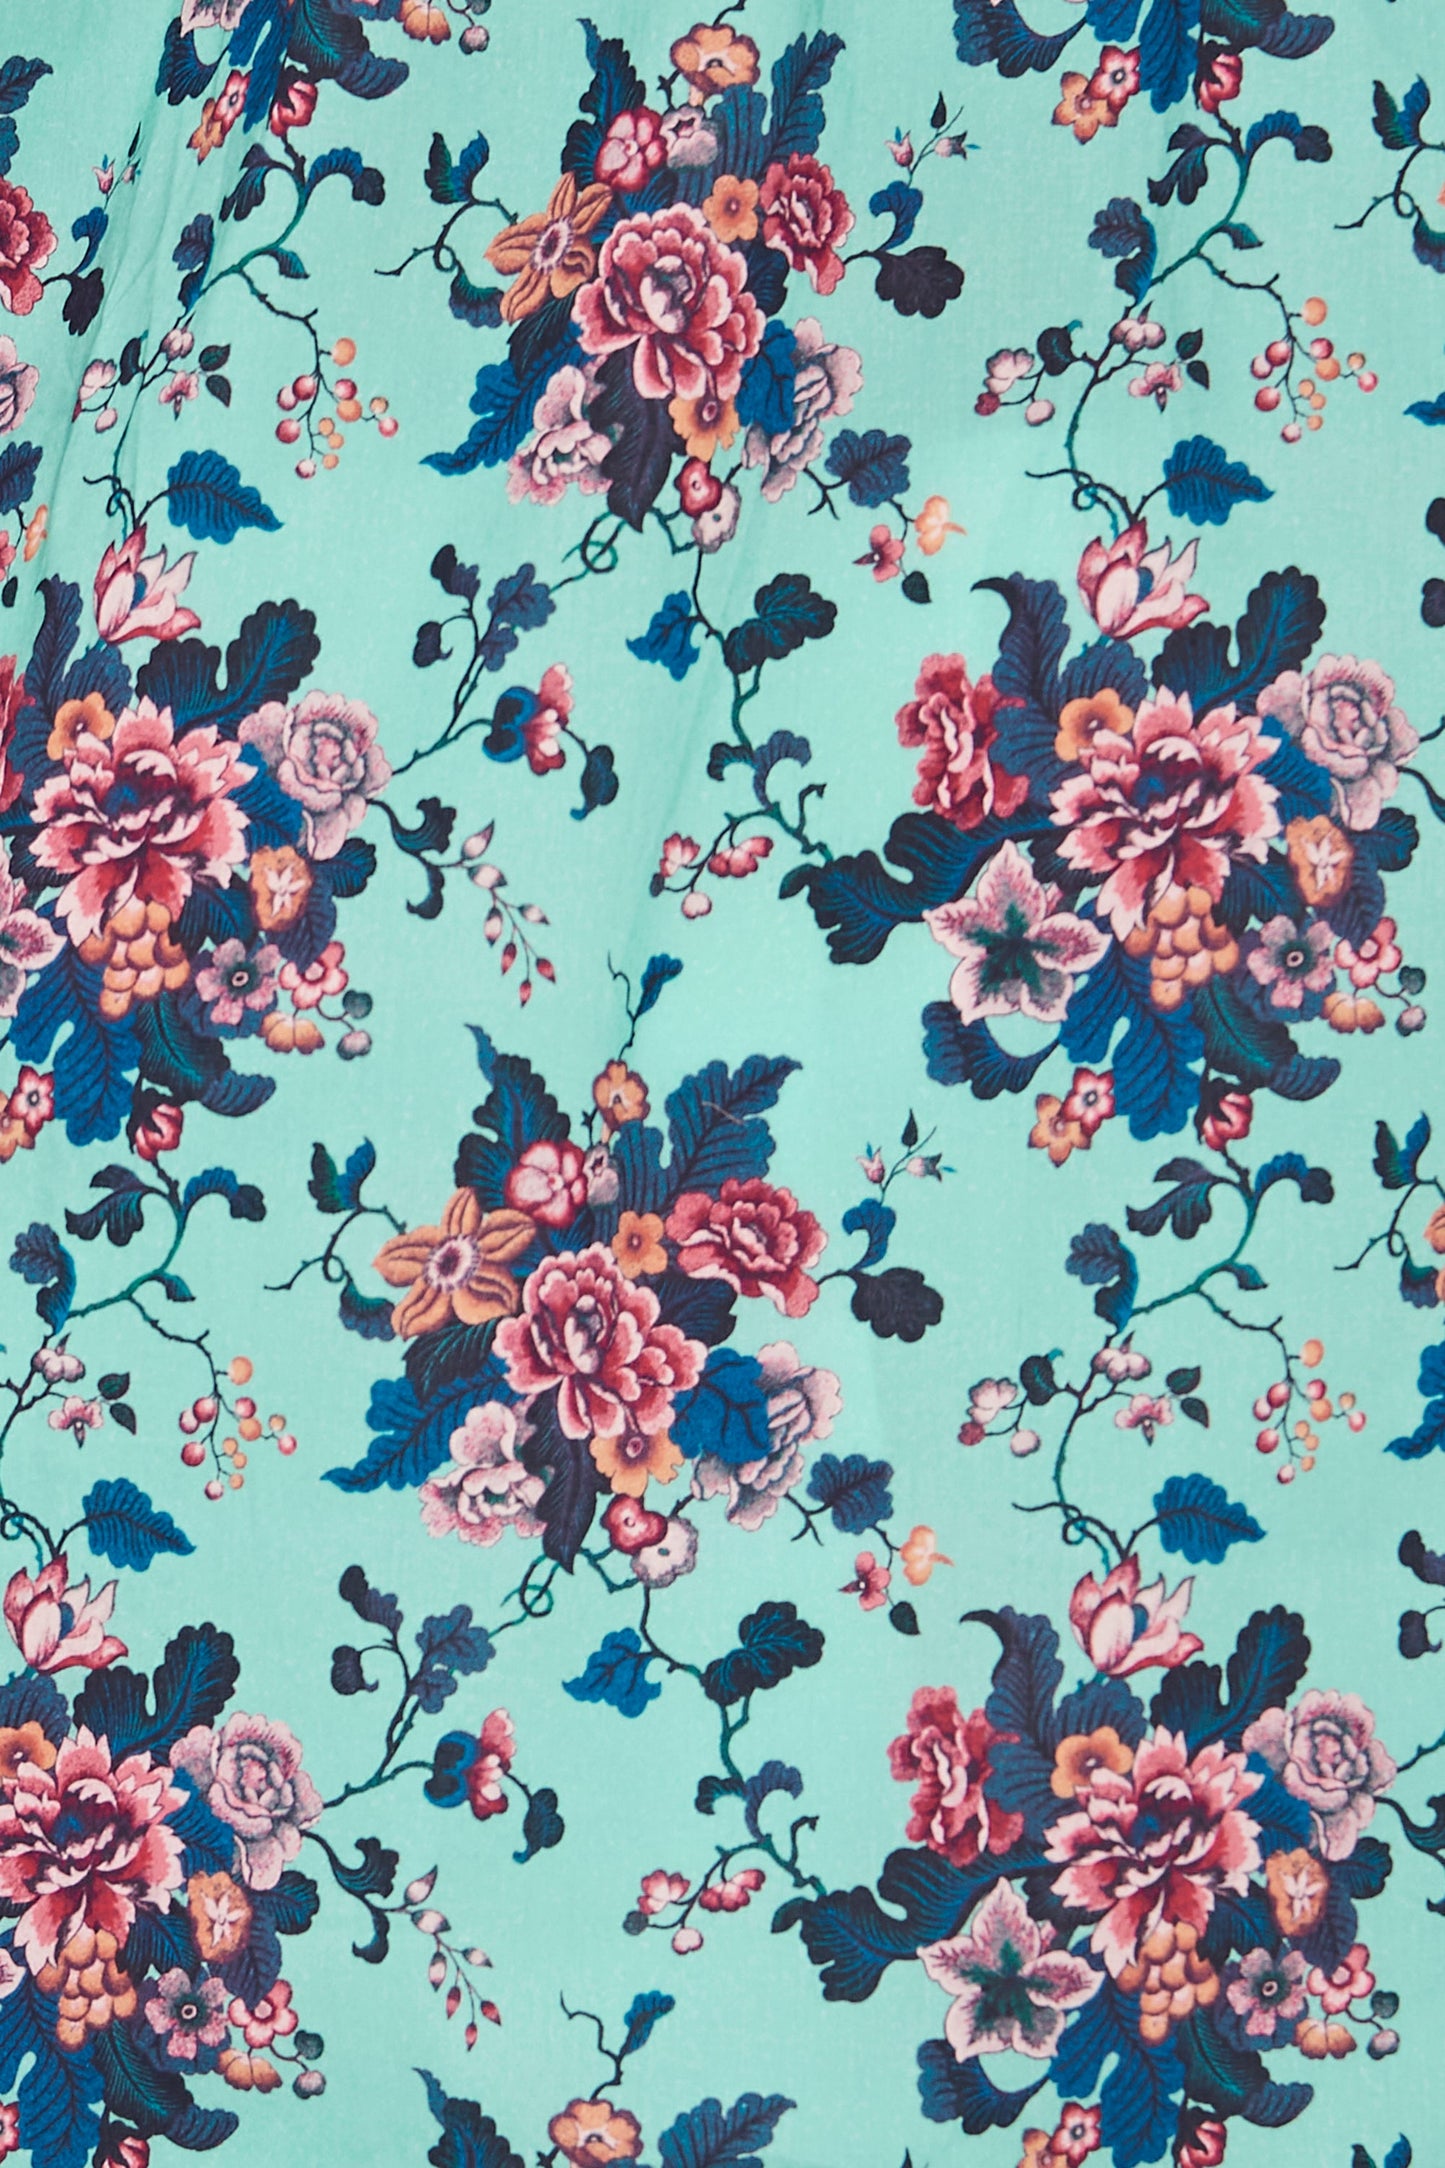 Grace Dress in Turquoise Chinoiserie